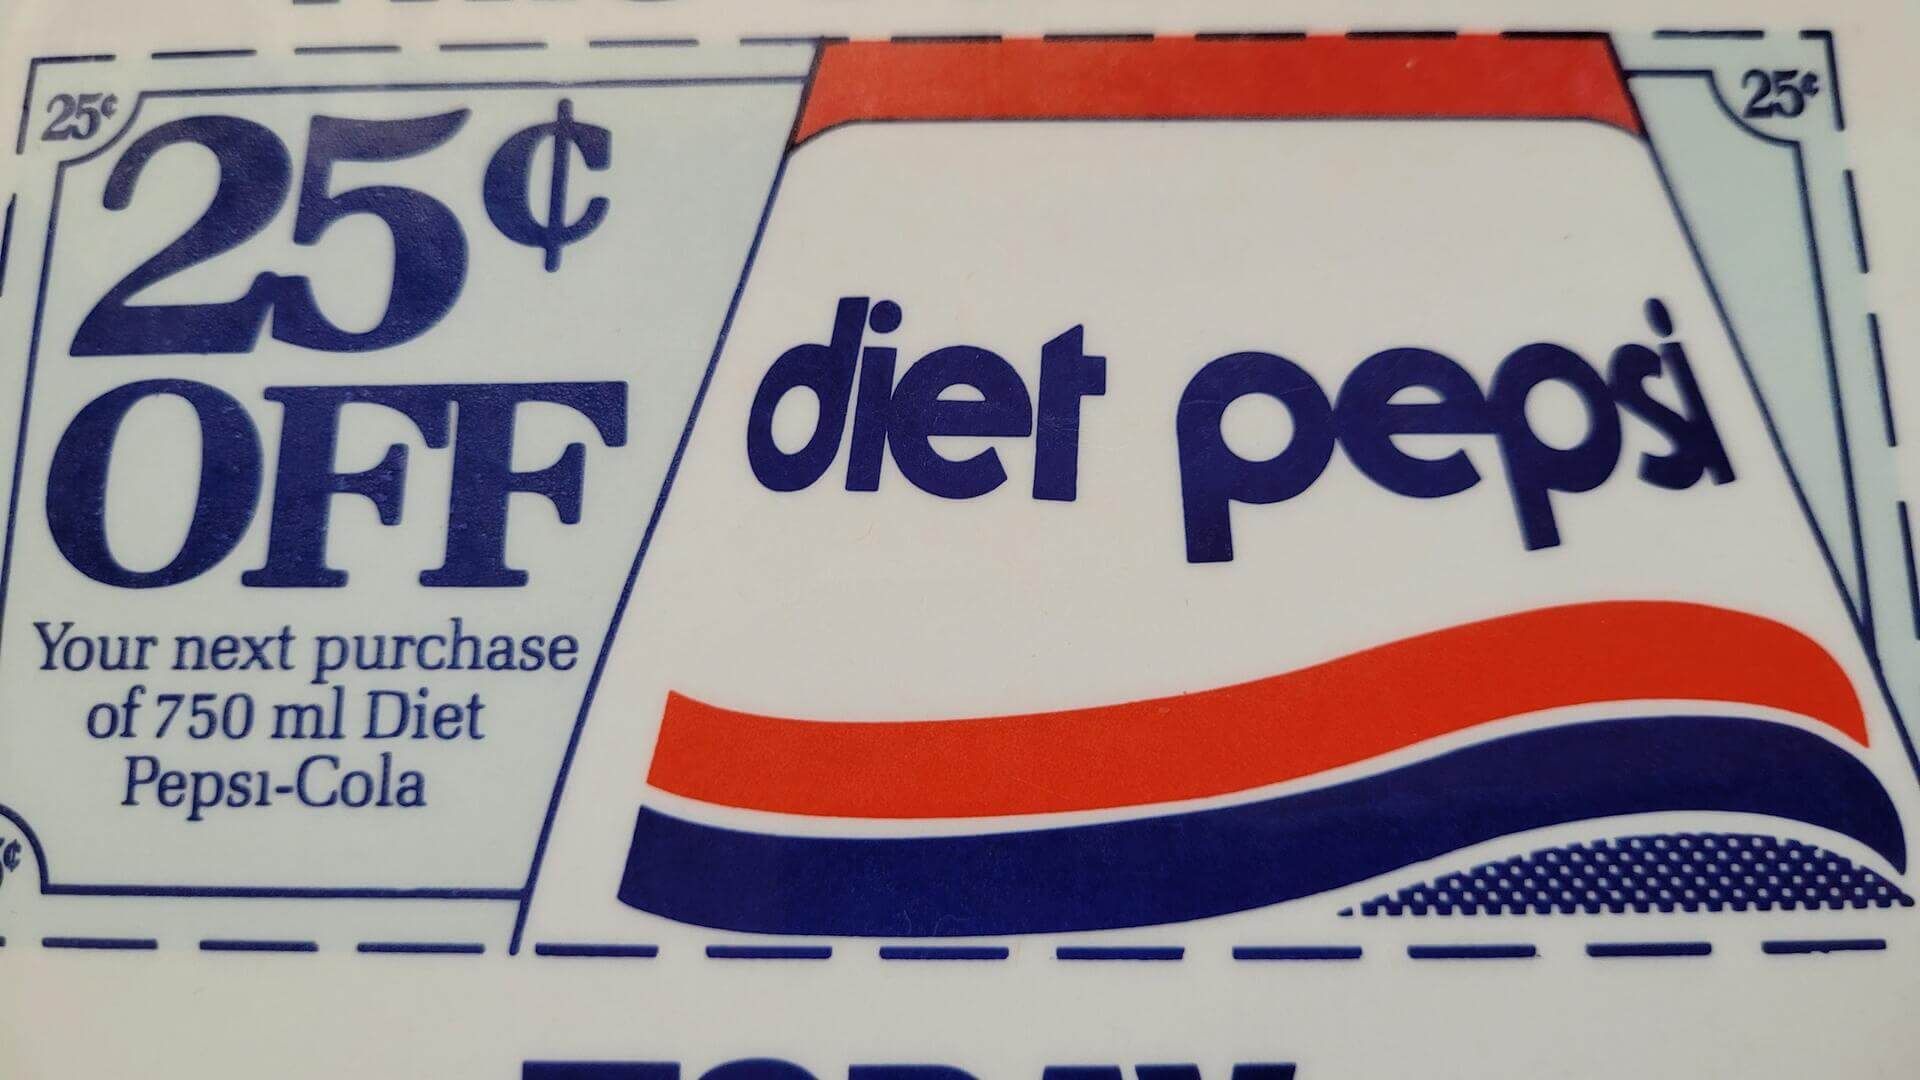 Vintage Diet Pepsi In Store Promotional 6" Pin Pinback Button - Retro 1975-1986 Diet Pepsi Cola branding period soda advertising collectible for 25 cents Off coupon redeption on the next 750ml soda glass bottle